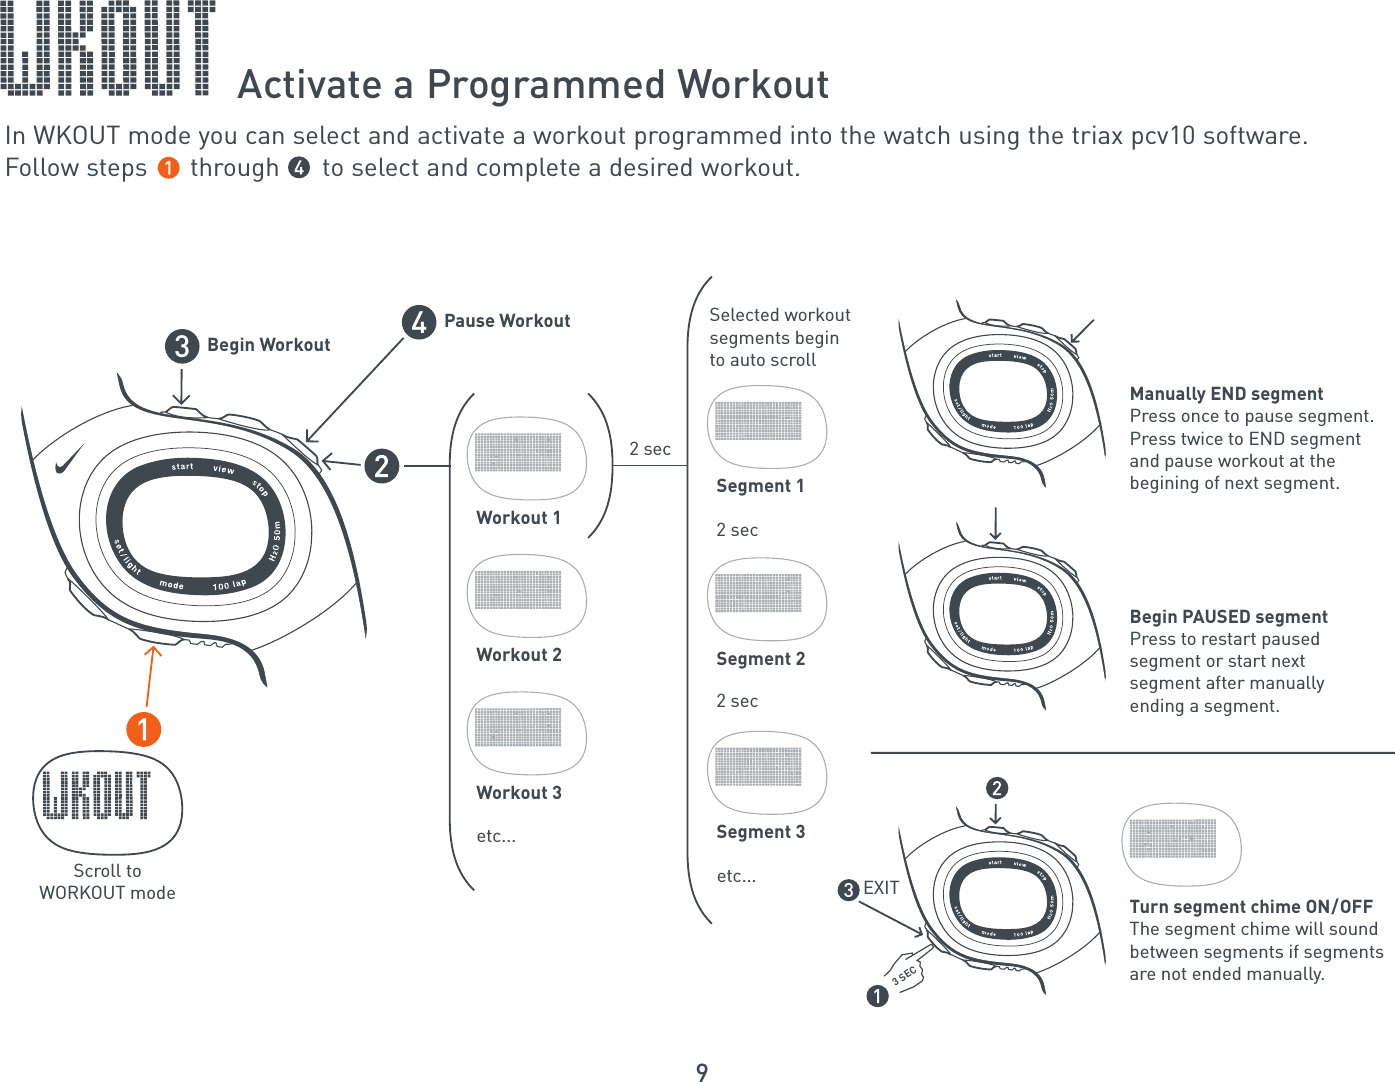 9Activate a Programmed WorkoutIn WKOUT mode you can select and activate a workout programmed into the watch using the triax pcv10 software.Follow steps      through      to select and complete a desired workout.Scroll toWORKOUT modeWorkout 1Workout 2Workout 3etc...Segment 1Segment 2Segment 3etc... EXIT2 sec2 sec2 secSelected workout segments begin to auto scroll Begin Workout3Pause Workout4Manually END segmentPress once to pause segment.Press twice to END segmentand pause workout at thebegining of next segment.Begin PAUSED segmentPress to restart paused segment or start next segment after manually ending a segment.Turn segment chime ON/OFFThe segment chime will sound between segments if segments are not ended manually.3 SEC3